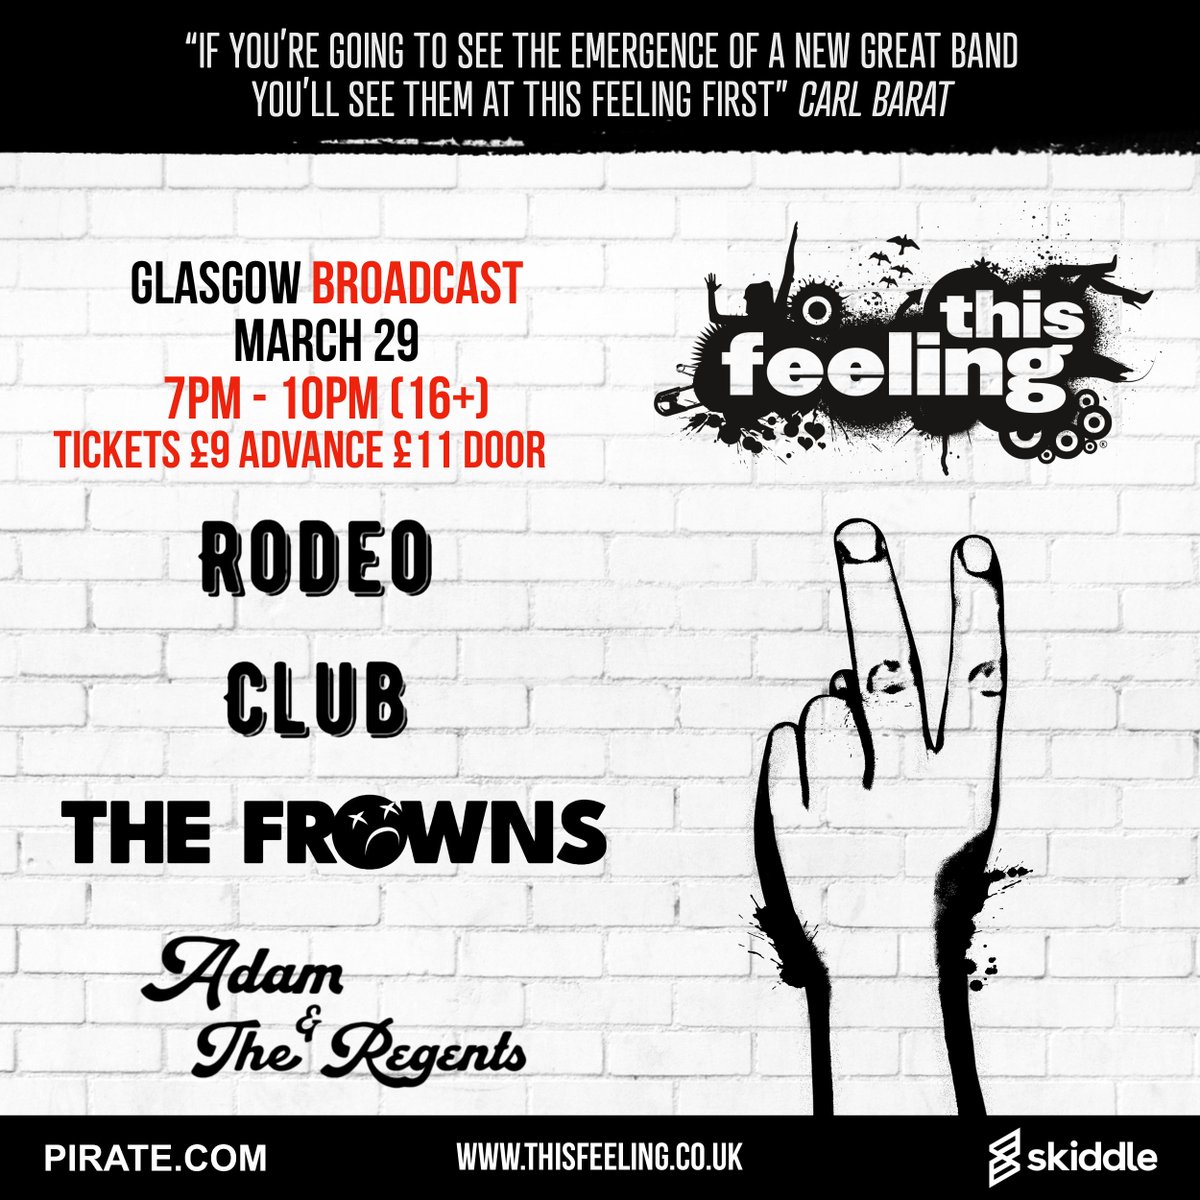 Full line up just announced 🎸 Mar 29 Glasgow @BroadcastGLA w/ @rodeoclubband @TheFrowns & #AdamandtheRegents 🎟️ skiddle.com/e/38039850